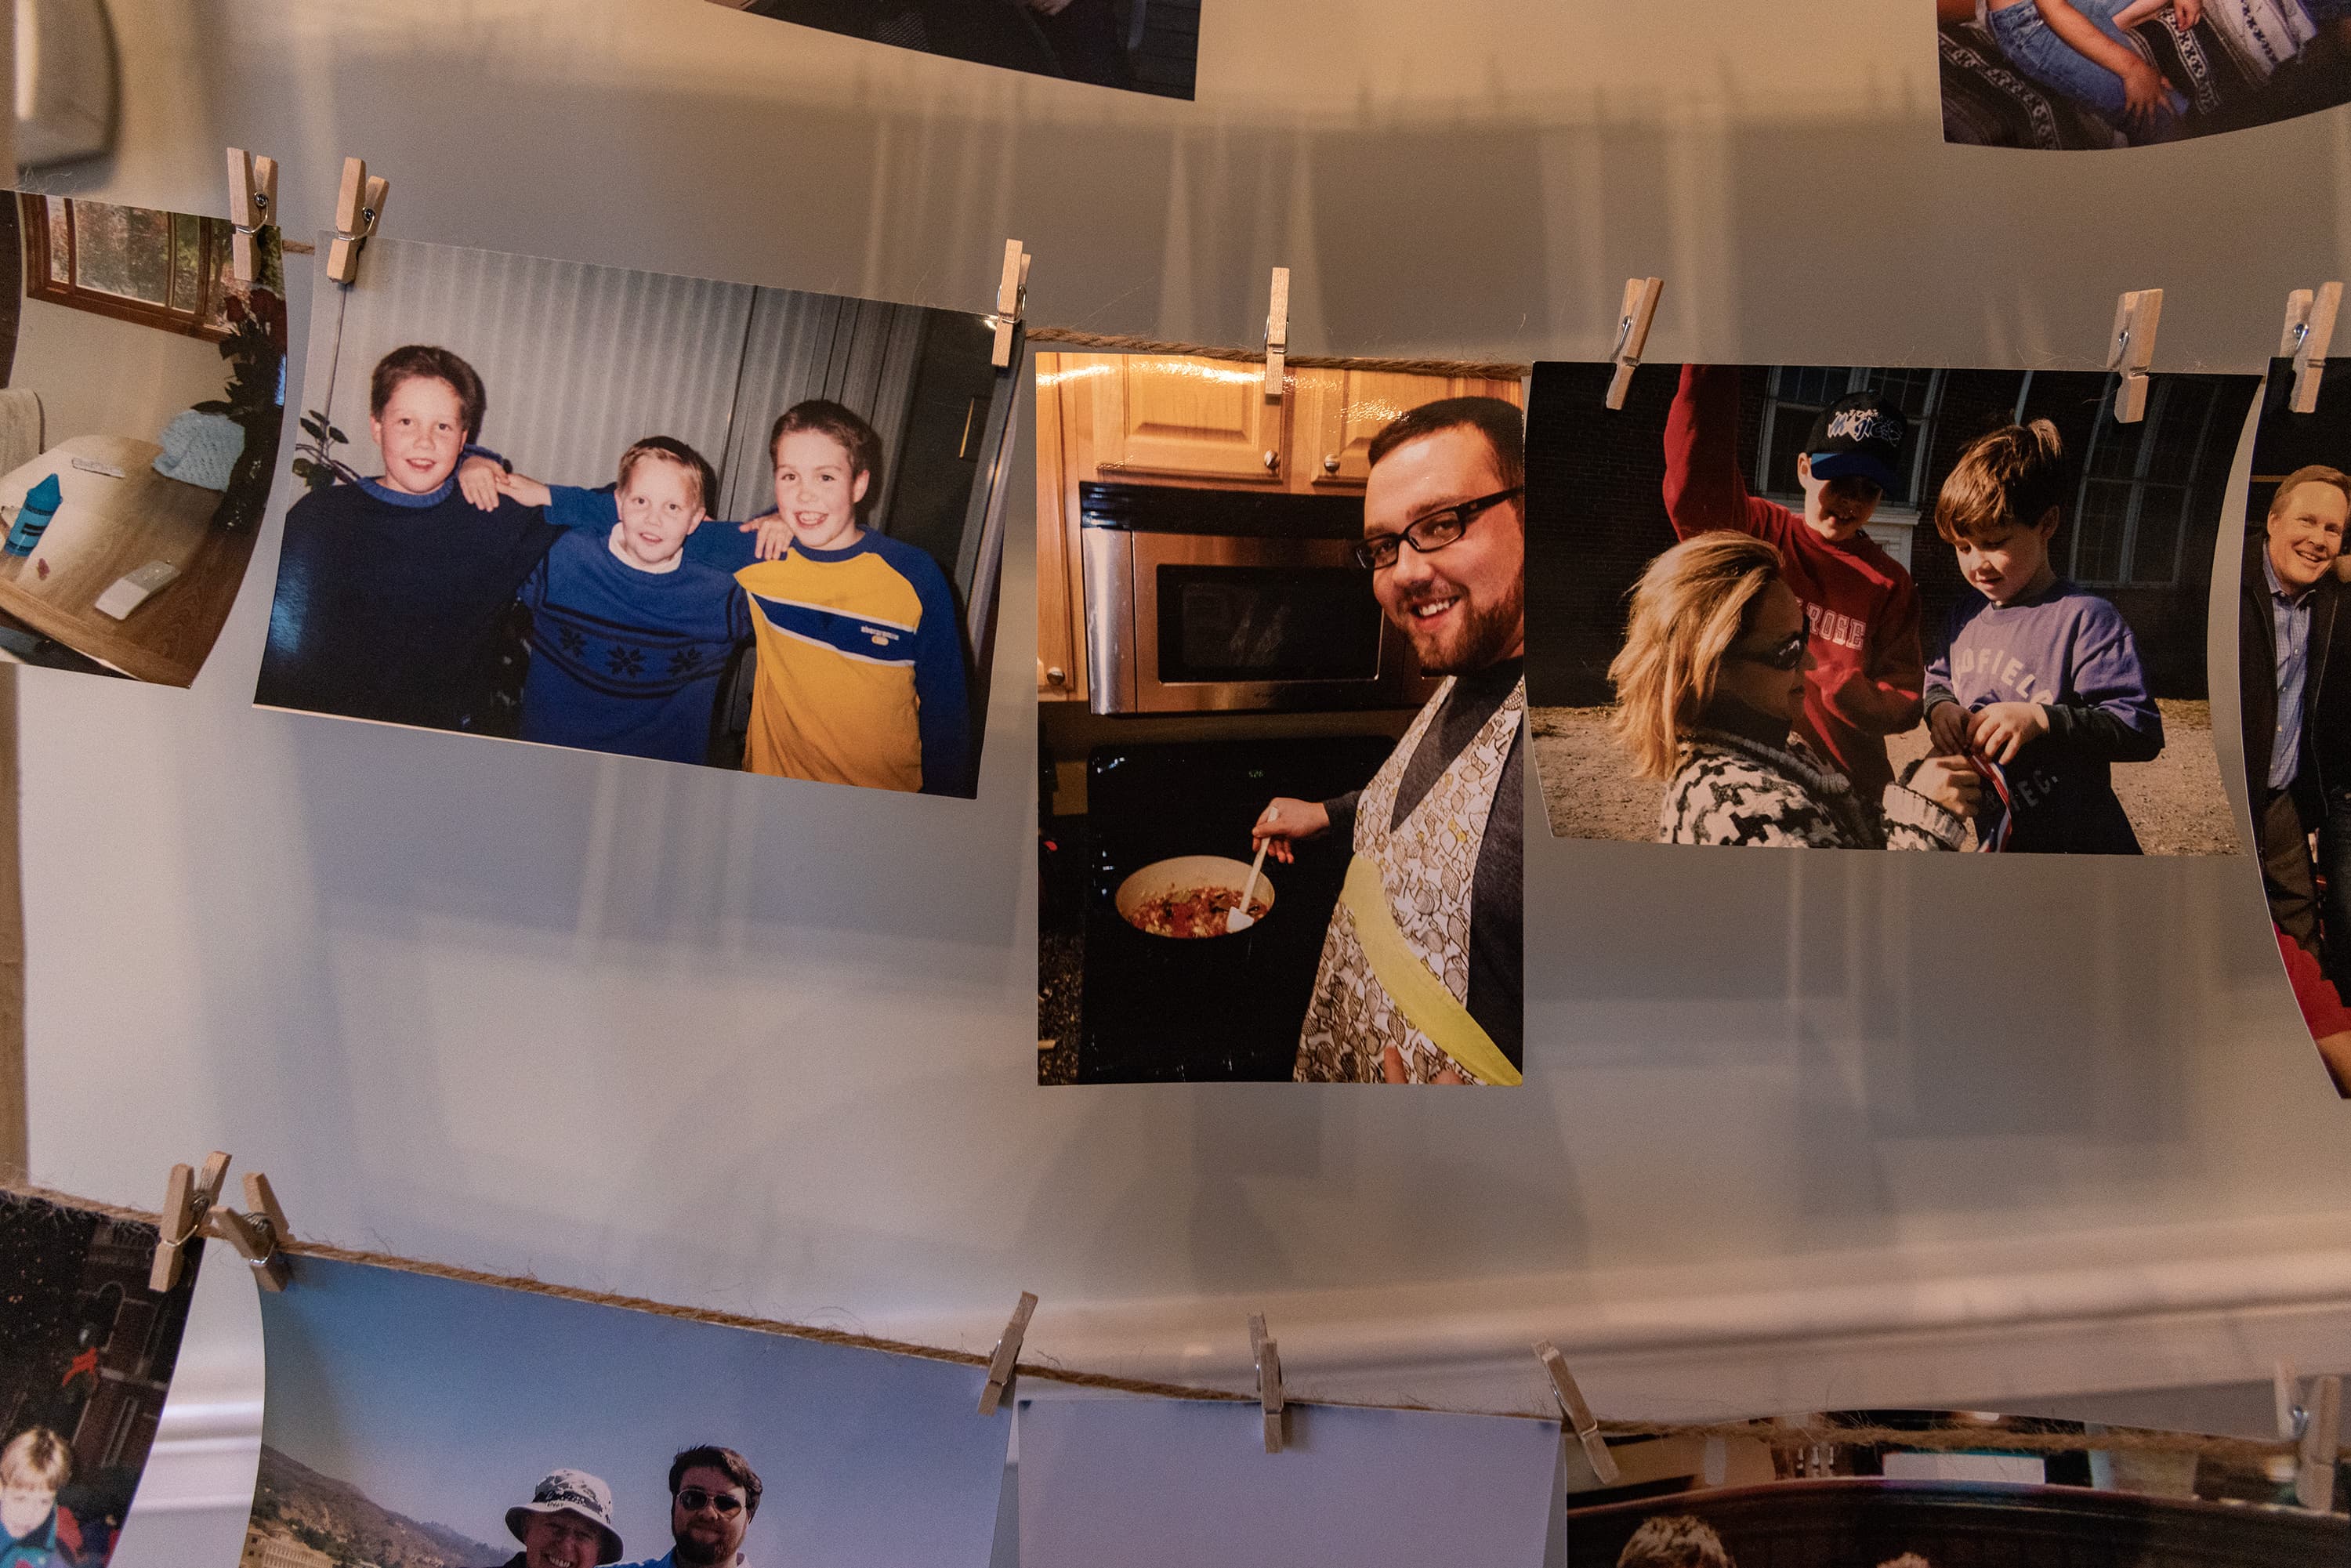 Photographs of Michael Conlon hang as a celebration of his life in his parent's dining room. (Jesse Costa/WBUR)